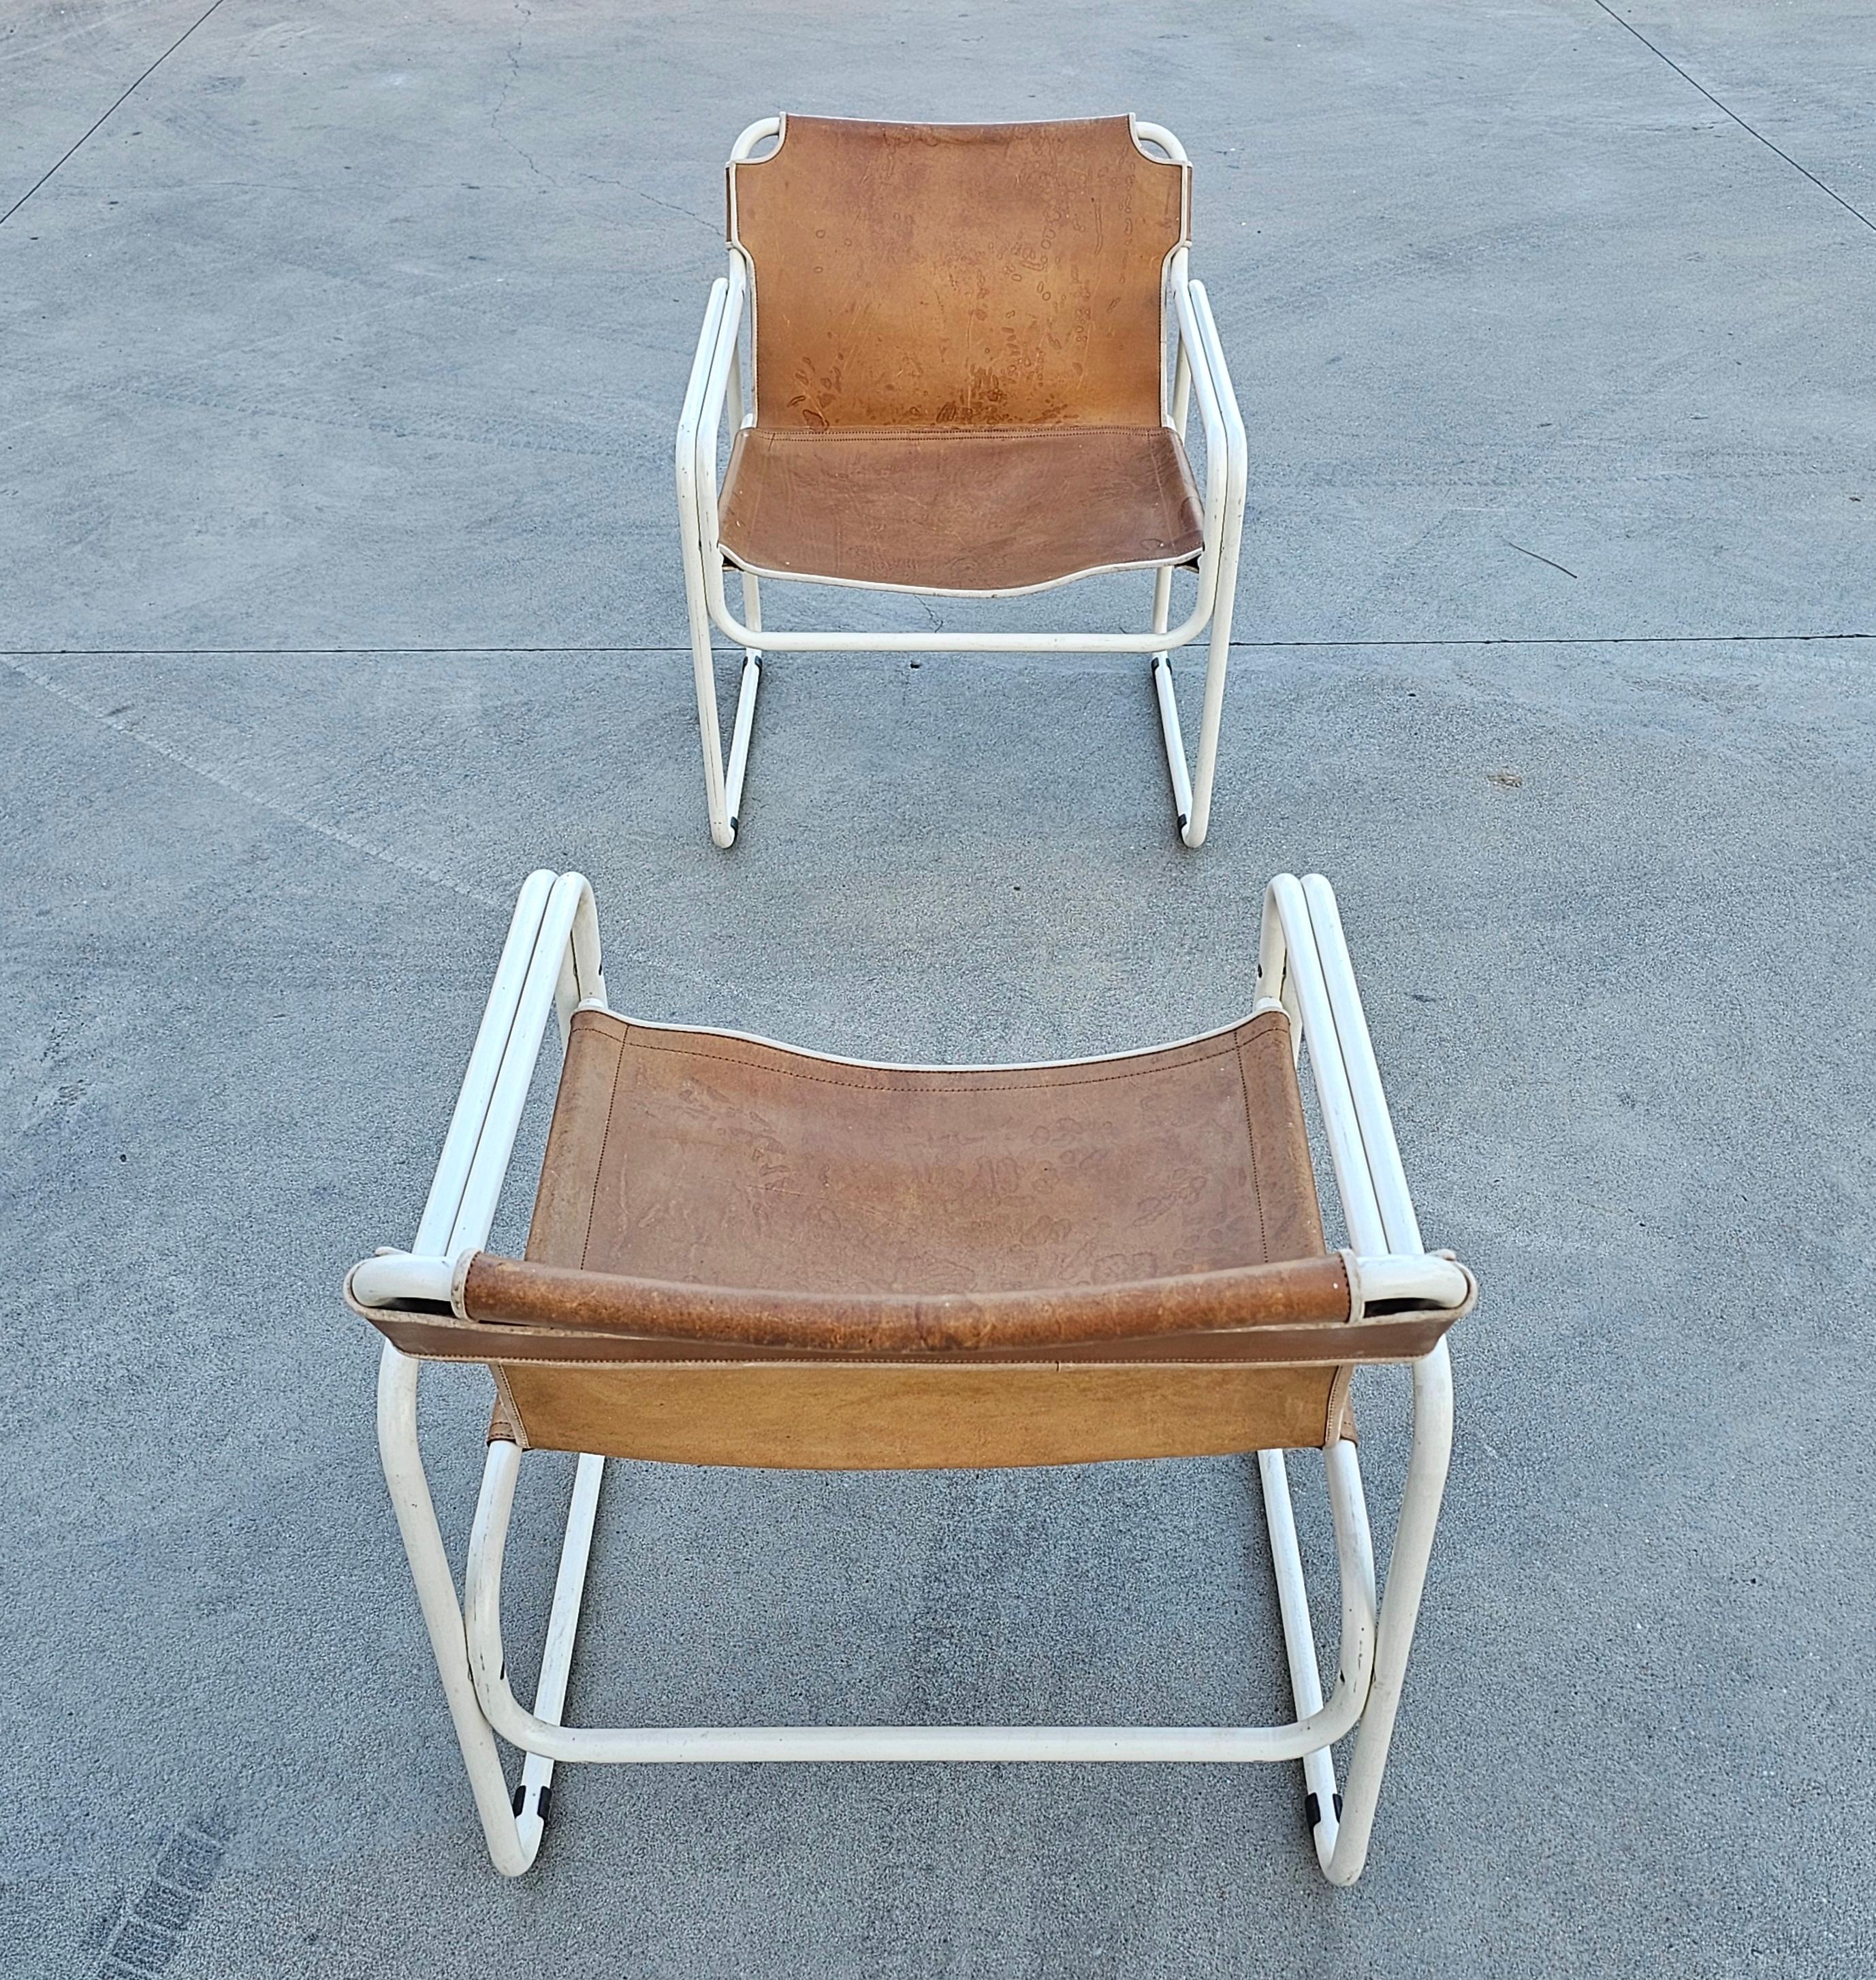 Bauhaus Style Tubular Easy Chairs in Cognac Leather by Jox Interni, 1970s For Sale 3